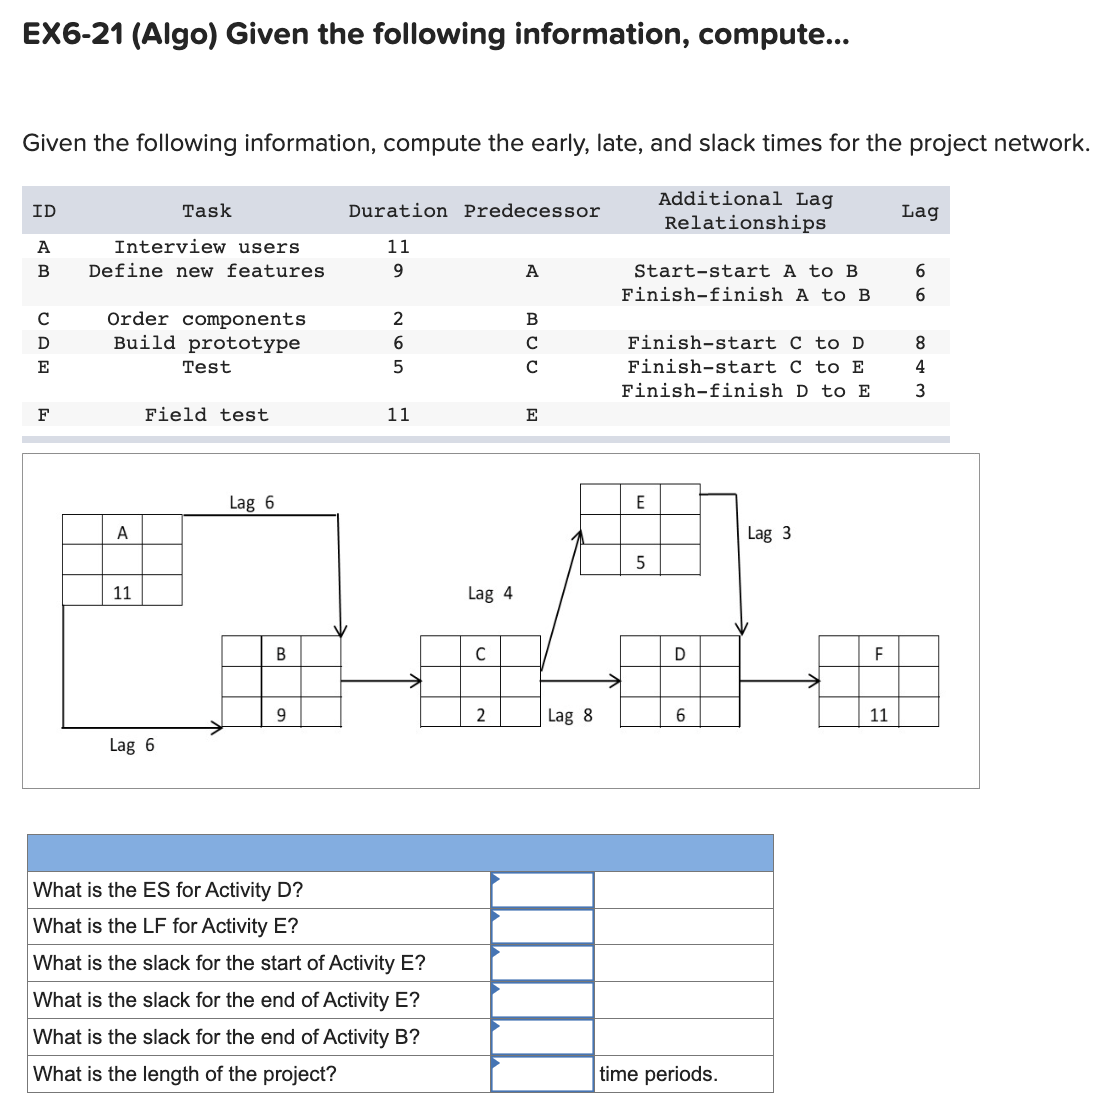 EX6-21 (Algo) Given the following information, compute...
Given the following information, compute the early, late, and slack times for the project network.
Additional Lag
Relationships
ID
A
B
C
DE
F
Interview users
Define new features
Order components
Build prototype
Test
A
Task
11
Field test
Lag 6
Lag 6
B
9
Duration Predecessor
11
9
2
6
5
11
What is the ES for Activity D?
What is the LF for Activity E?
What is the slack for the start of Activity E?
What is the slack for the end of Activity E?
What is the slack for the end of Activity B?
What is the length of the project?
Lag 4
C
2
A BCO
с
E
Lag 8
Start-start A to B
Finish-finish A to B
Finish-start C to D
Finish-start C to E
Finish-finish D to E
E
5
D
6
time periods.
Lag 3
→
F
11
Lag
6
6
8
4
3